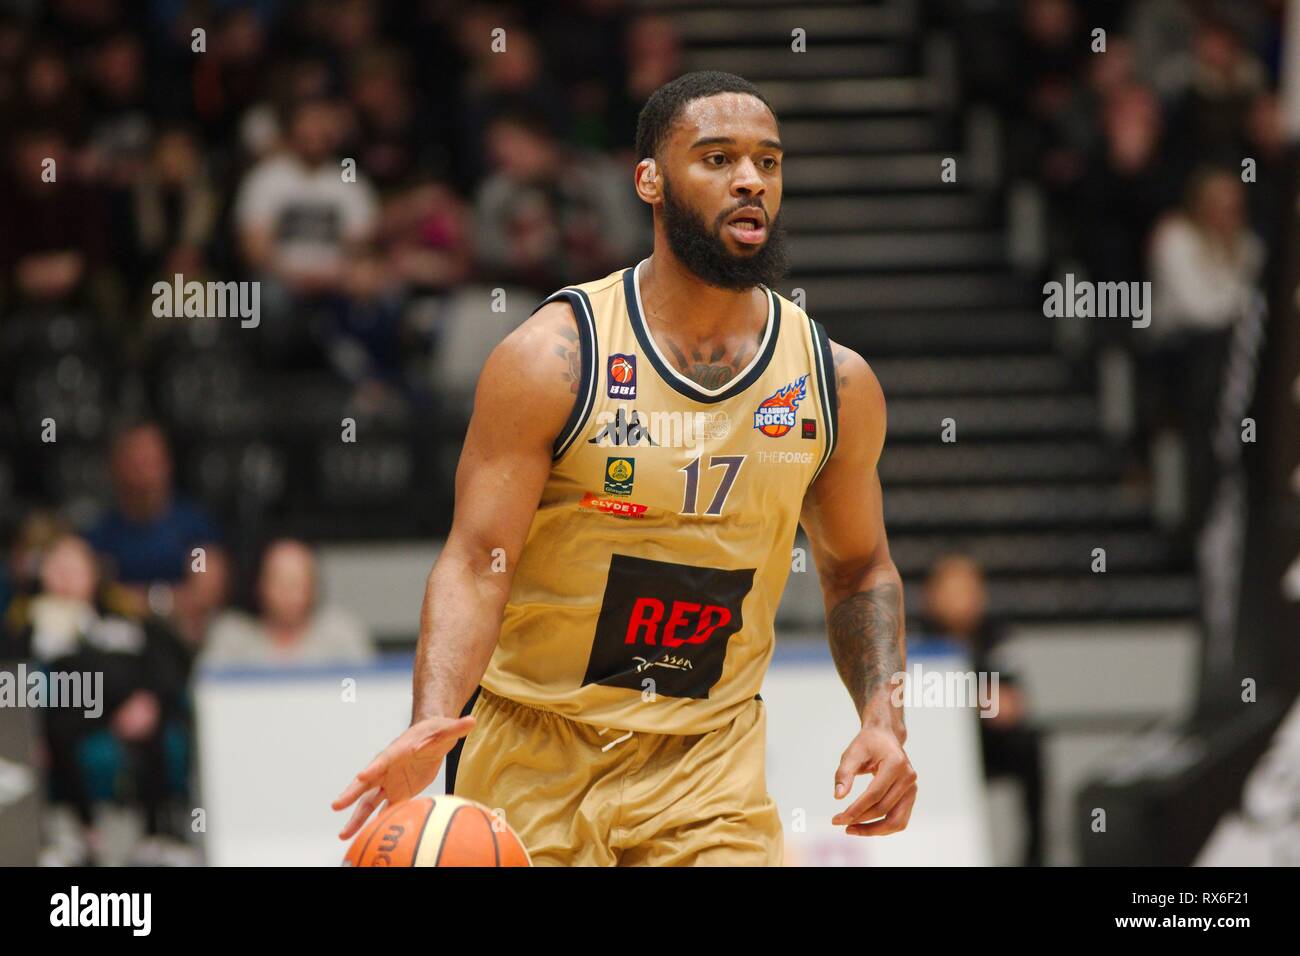 Newcastle upon Tyne, UK. 08 March 2019. Greg Pryor playing for Radisson RED Glasgow Rocks against Esh Group Eagles Newcastle in the British Basketball League championship match at the Eagles Community Arena in Newcastle upon Tyne. Credit: Colin Edwards/Alamy Live News. Stock Photo